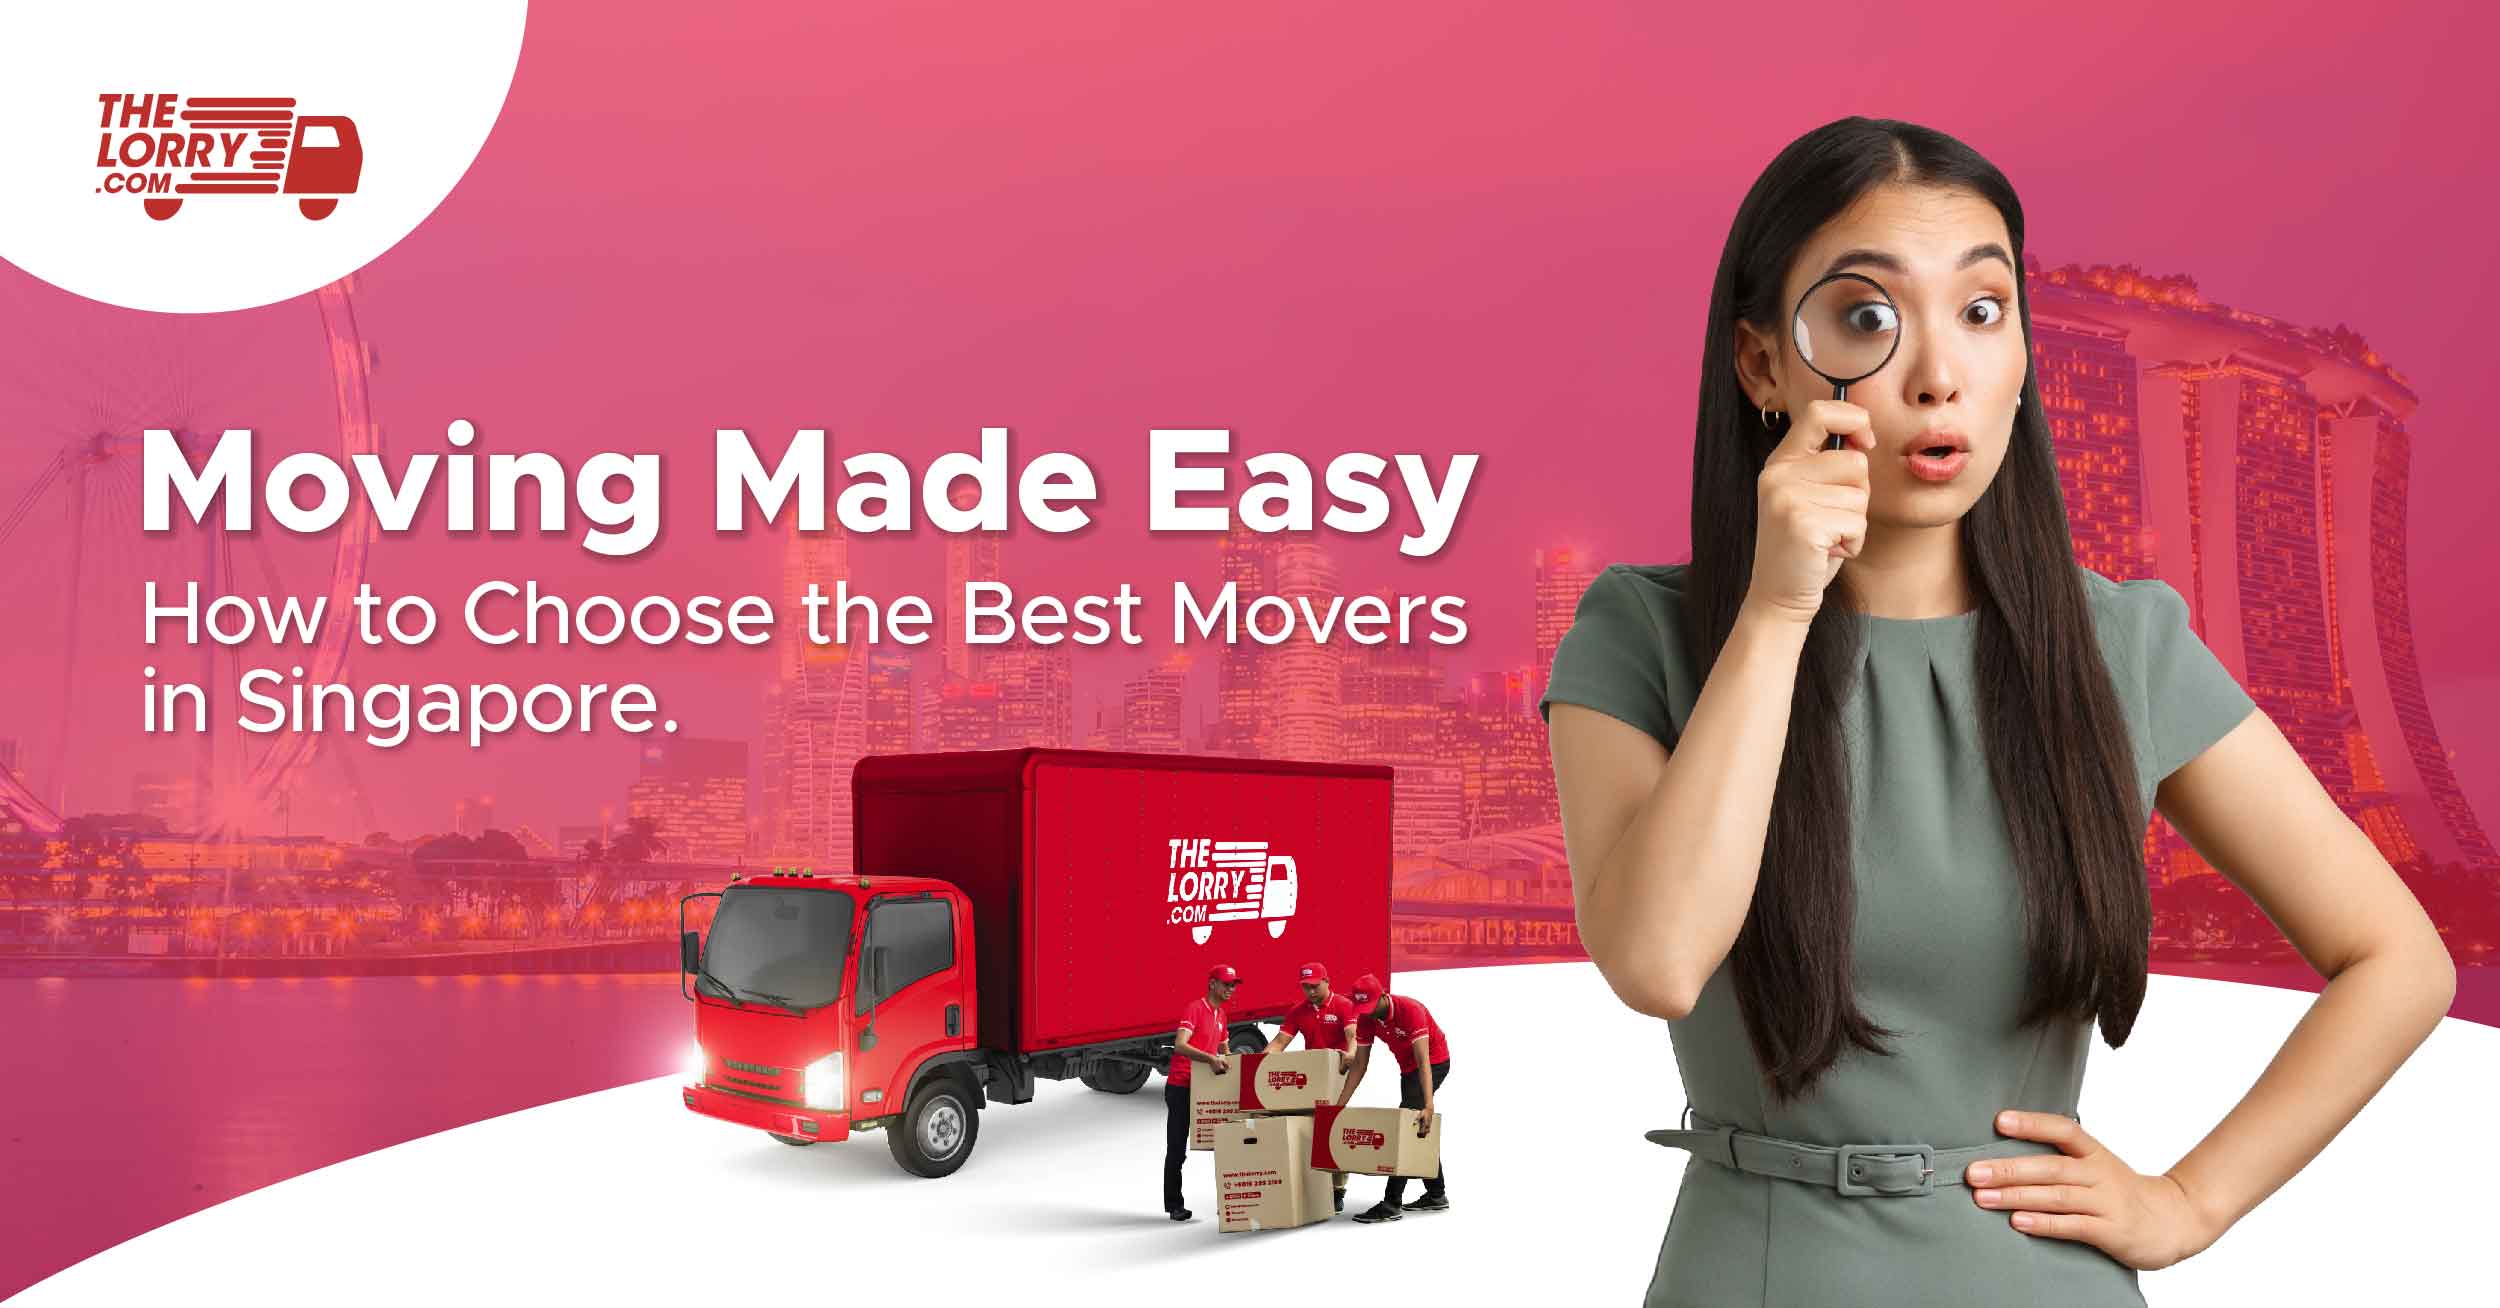 Moving Made Easy: How to Choose the Best Movers in Singapore